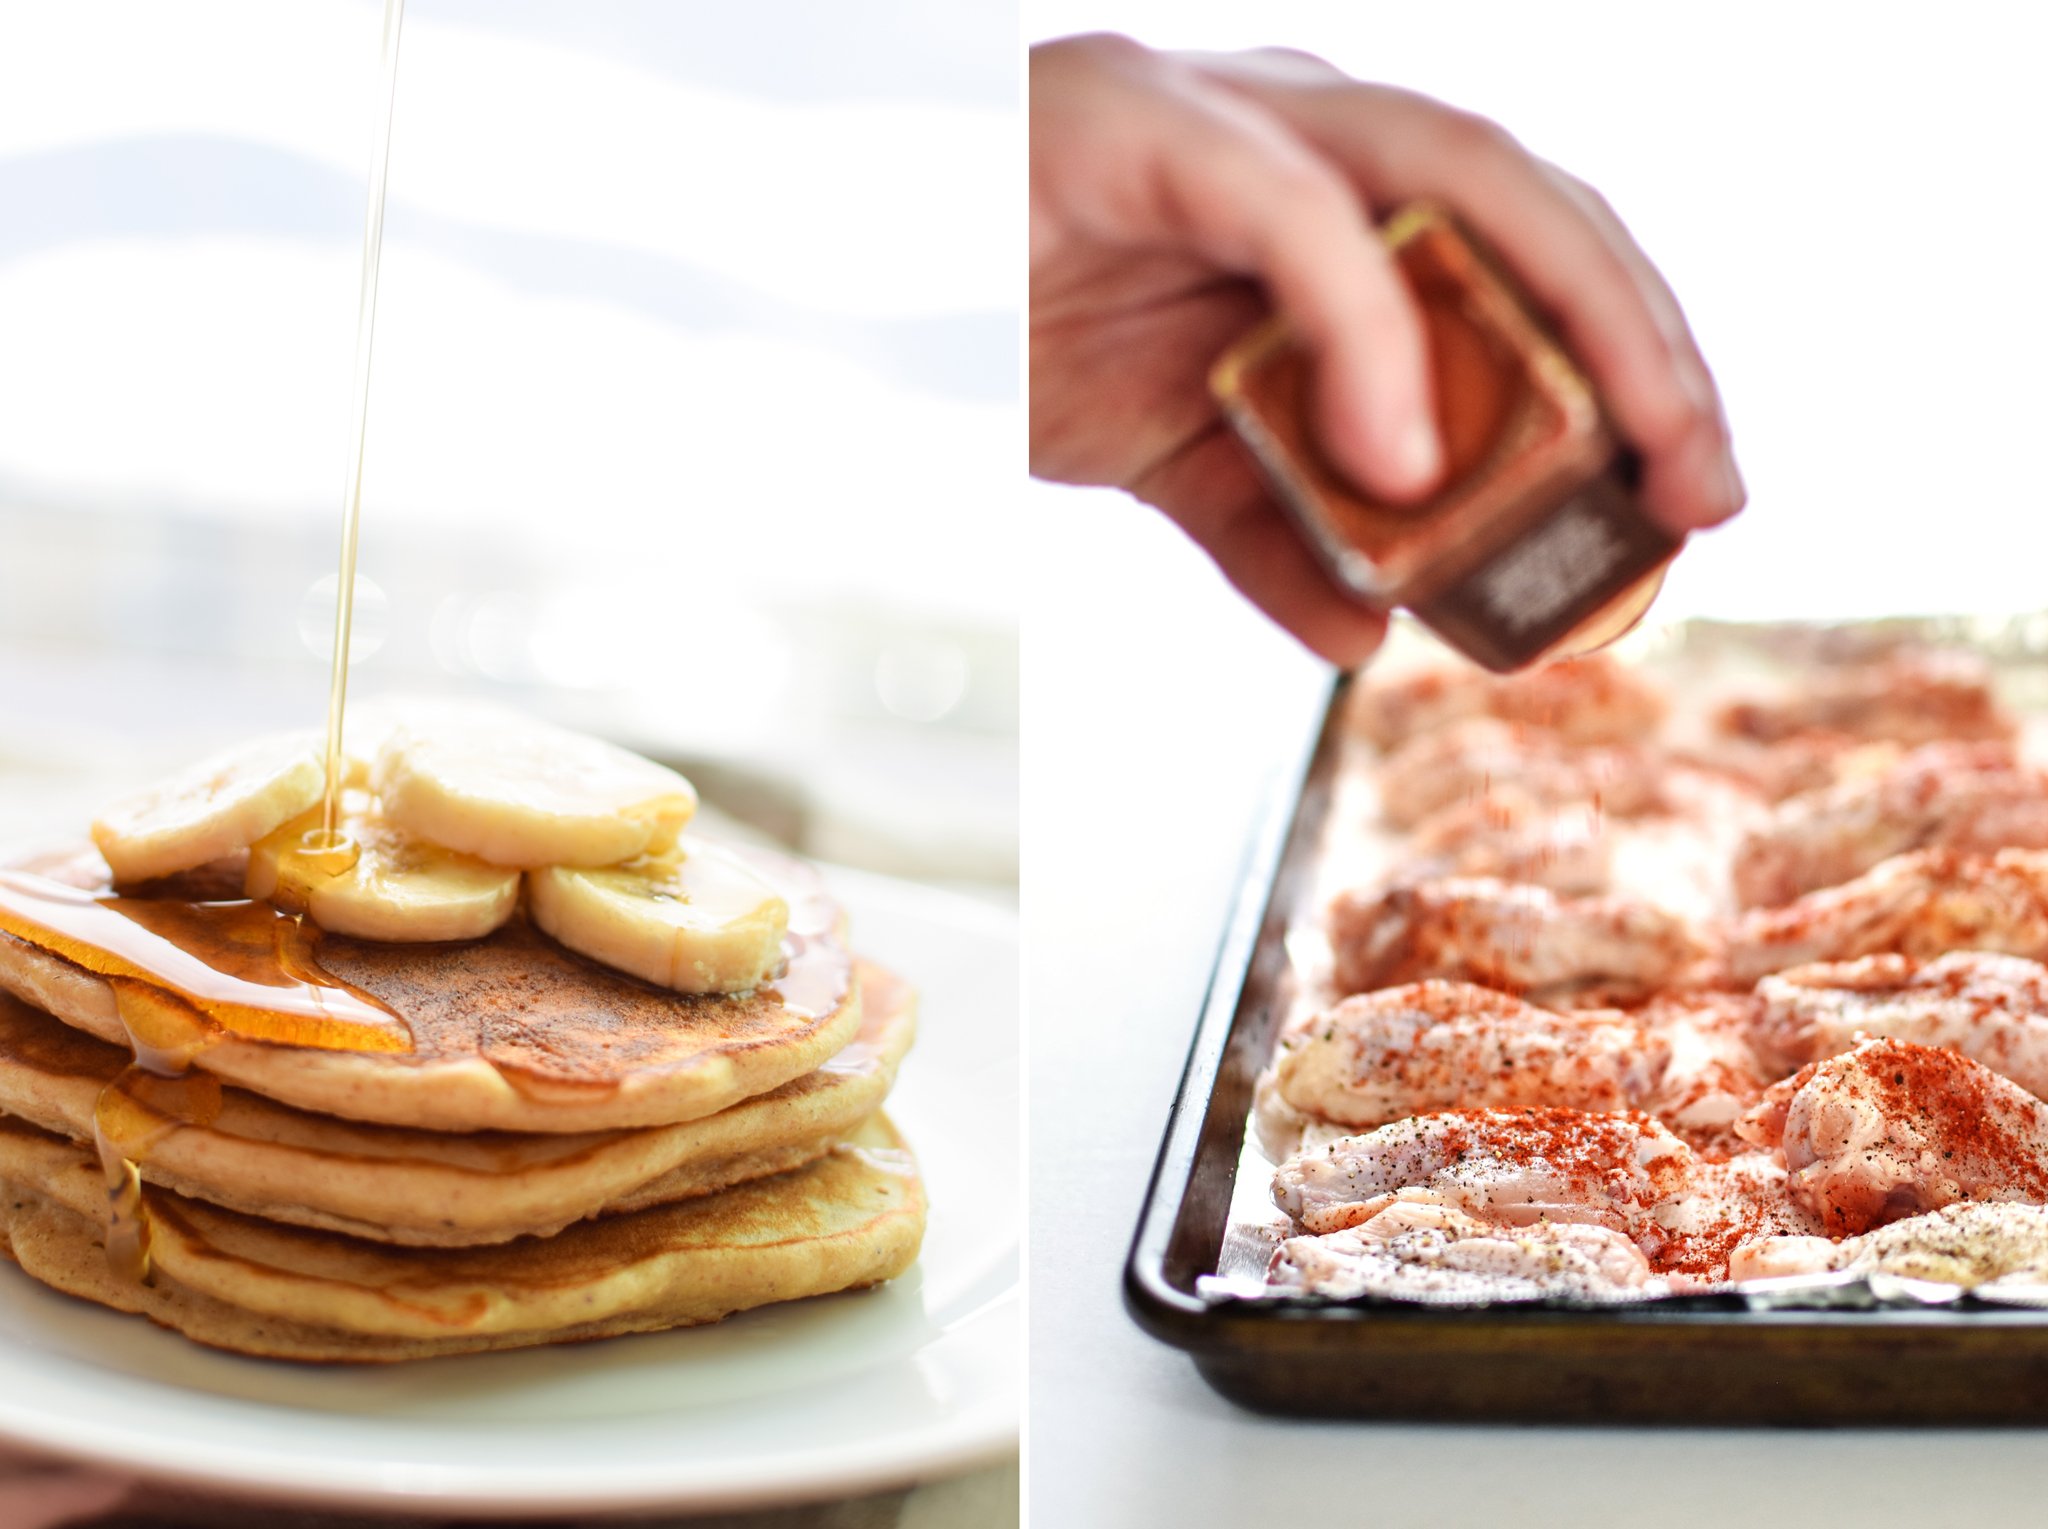 Banana protein pancakes with syrup drizzle on the left; paprika being sprinkled on raw chicken wings on the right.